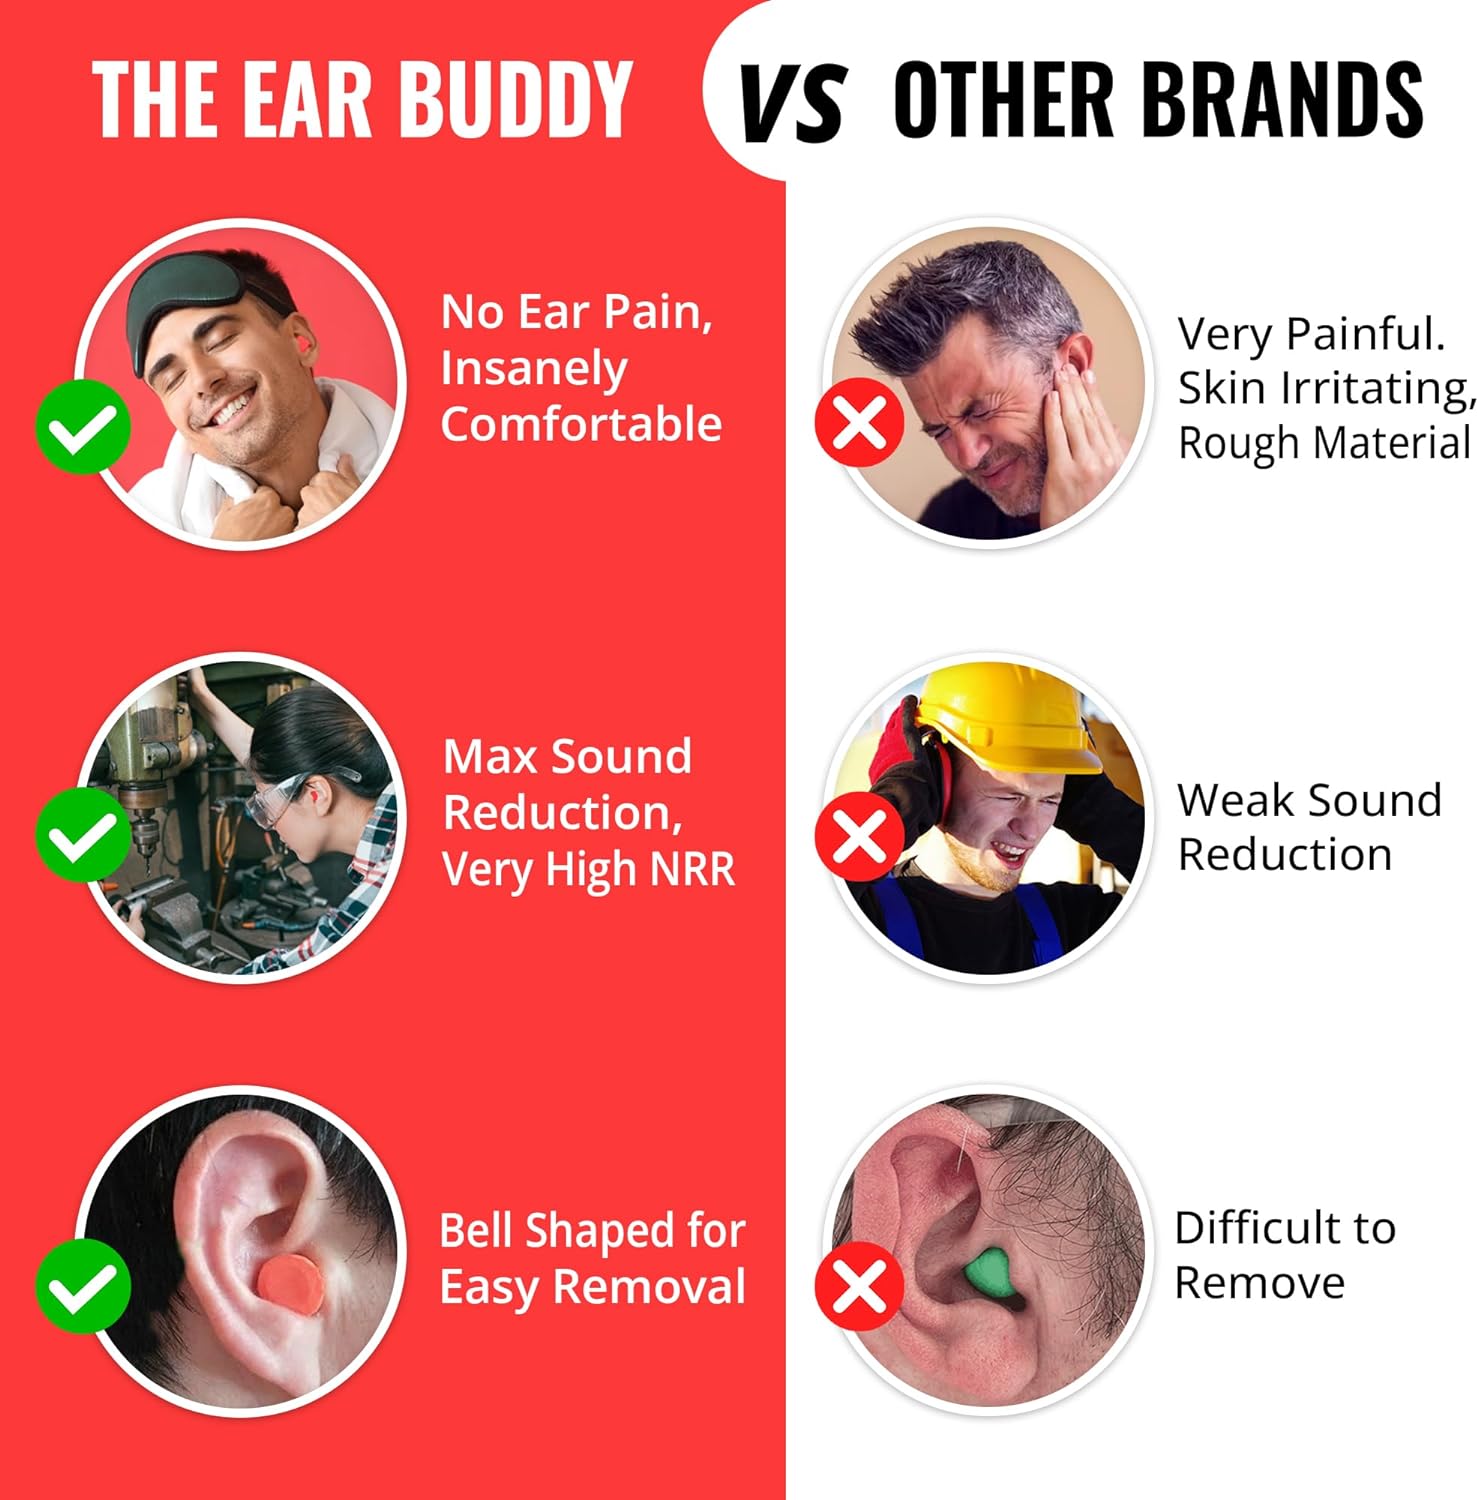 The Ear Buddy Premium Soft Foam Ear Plugs, Noise Cancelling Earplugs For Sleeping, Hearing Protection For Concerts, Work, Shooting & Travel, Noise Reduction Rating 32 Decibels, 50 Pairs - image 3 of 9